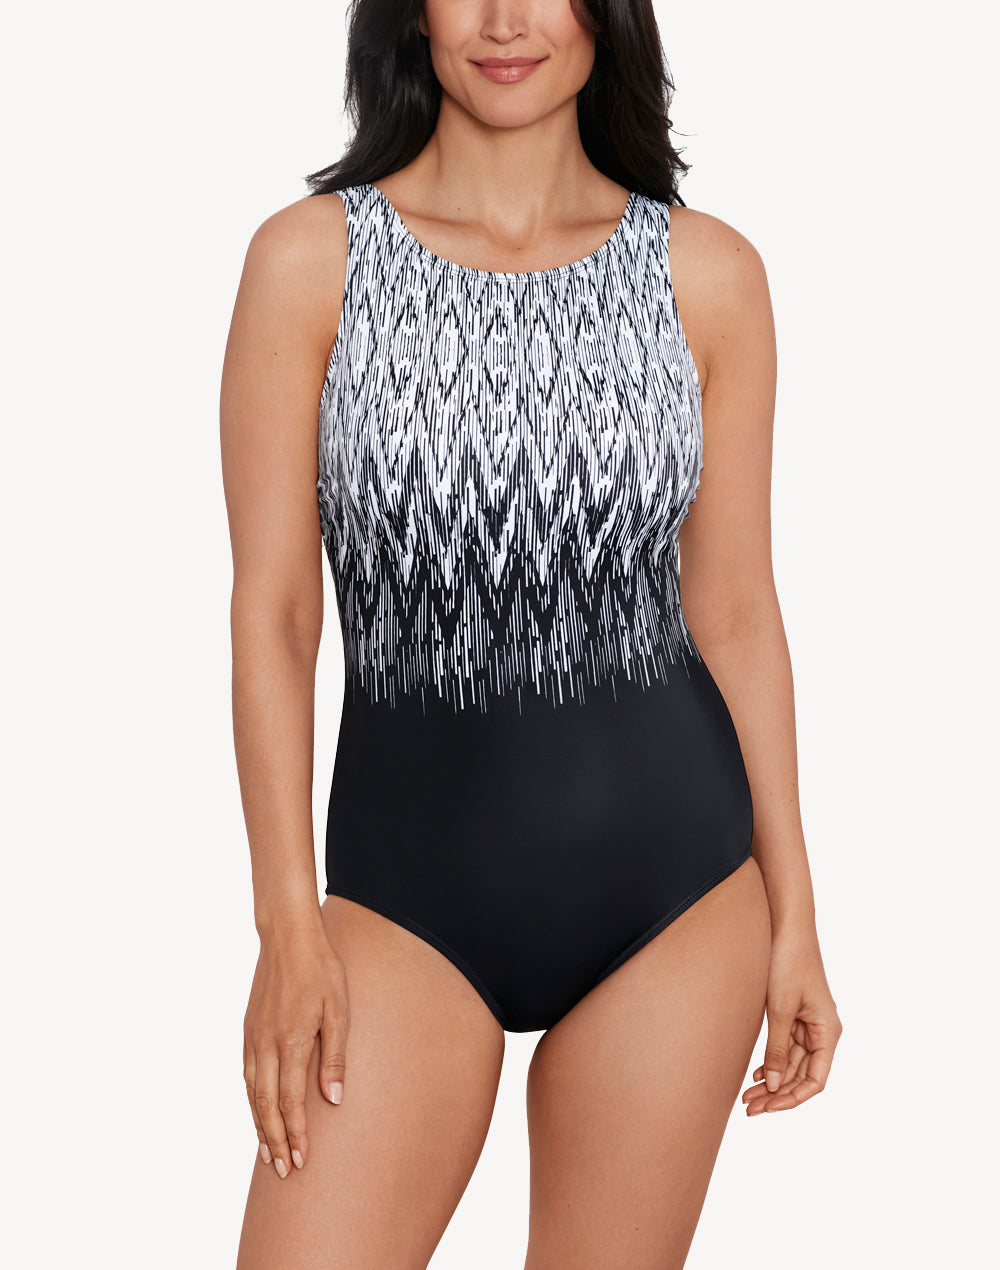 Therapy High Neck One Piece#color_therapy-black-white